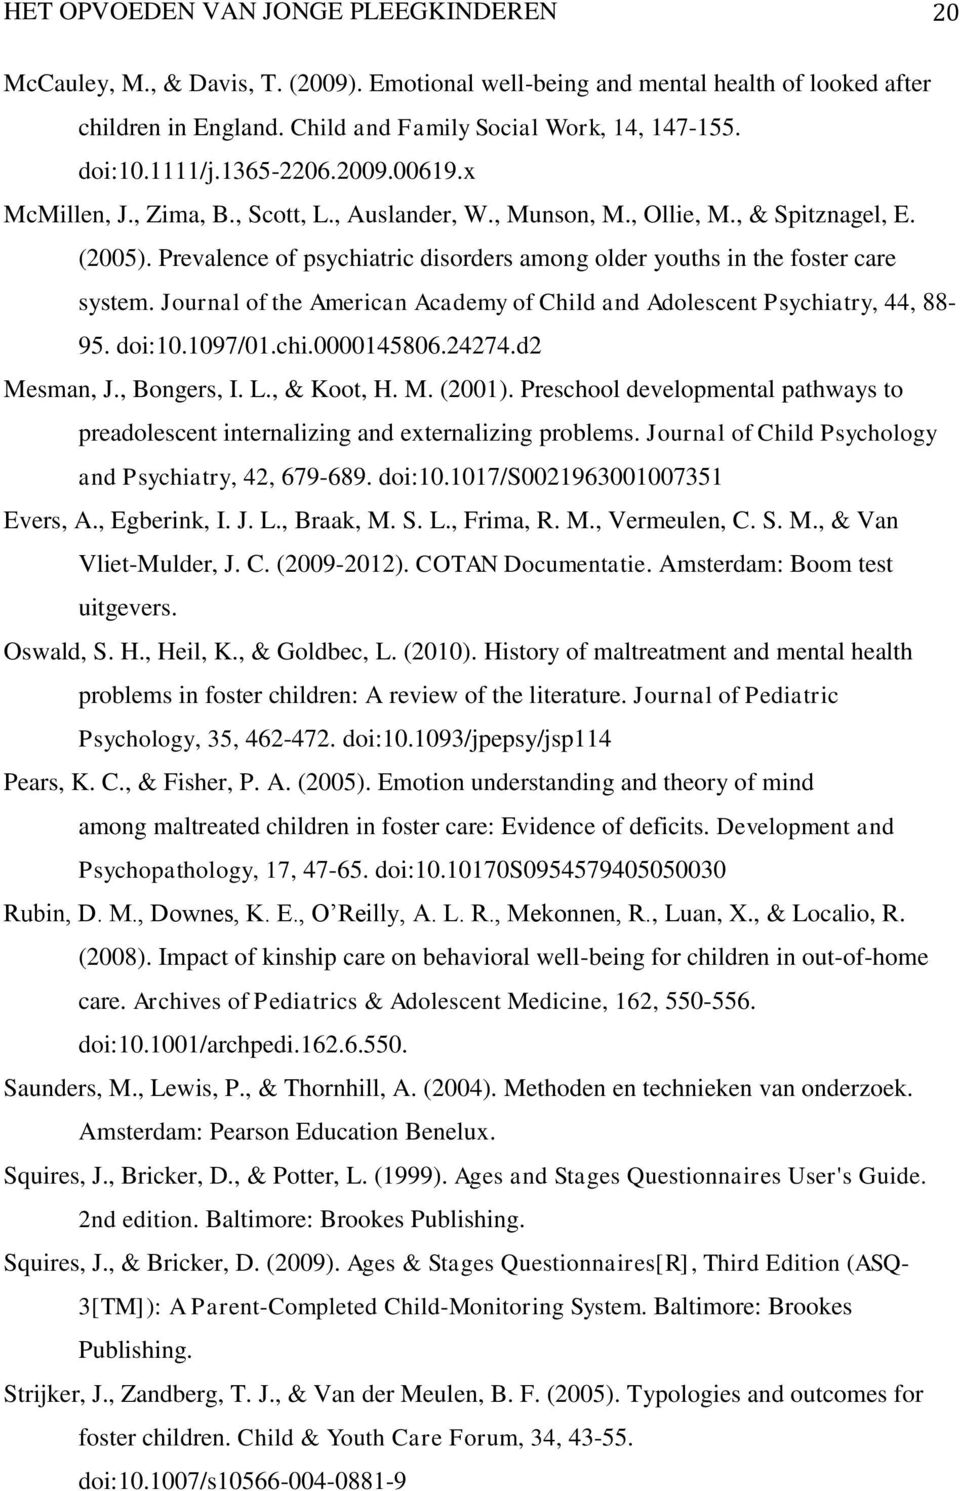 Prevalence of psychiatric disorders among older youths in the foster care system. Journal of the American Academy of Child and Adolescent Psychiatry, 44, 88-95. doi:10.1097/01.chi.0000145806.24274.